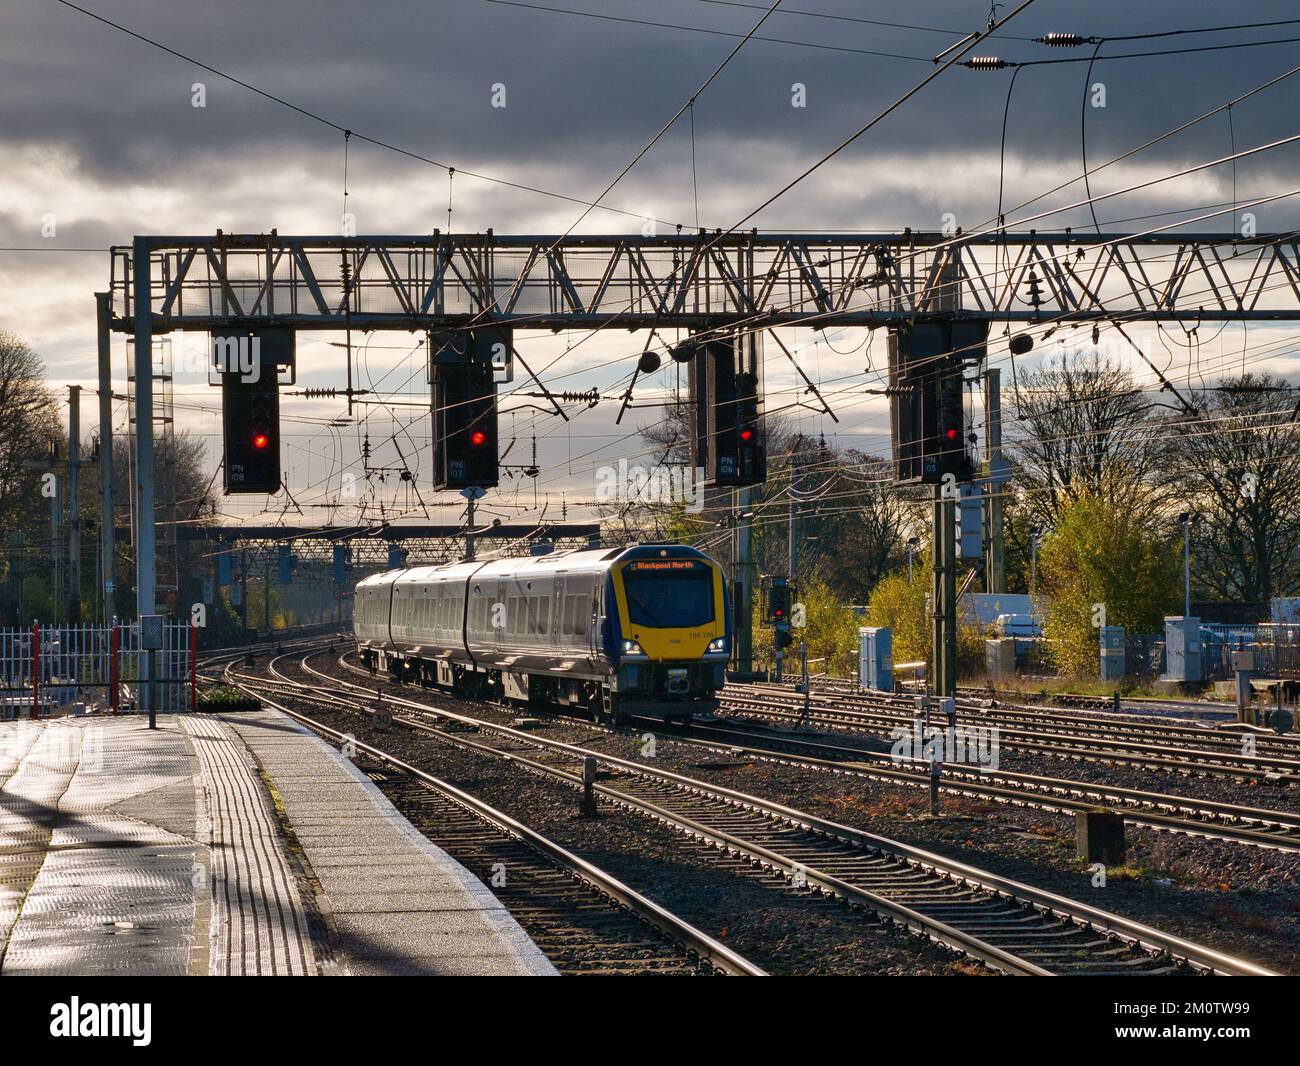 A commuter train arrives at Preston station in the north of the UK. Overhead signals and power lines are visible. Stock Photo